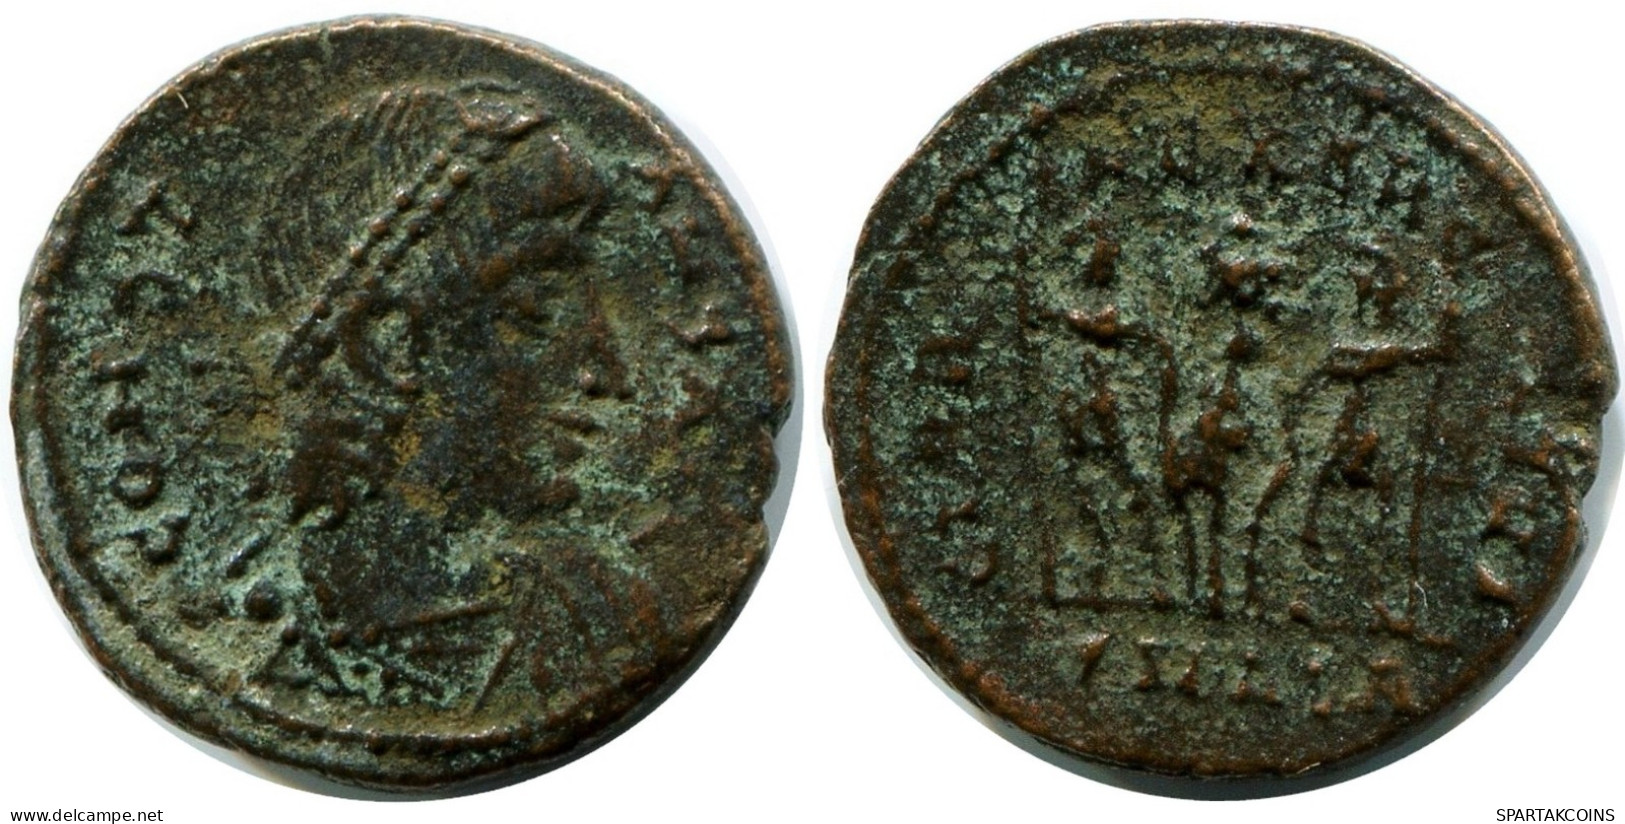 CONSTANS MINTED IN ALEKSANDRIA FROM THE ROYAL ONTARIO MUSEUM #ANC11335.14.U.A - Der Christlischen Kaiser (307 / 363)